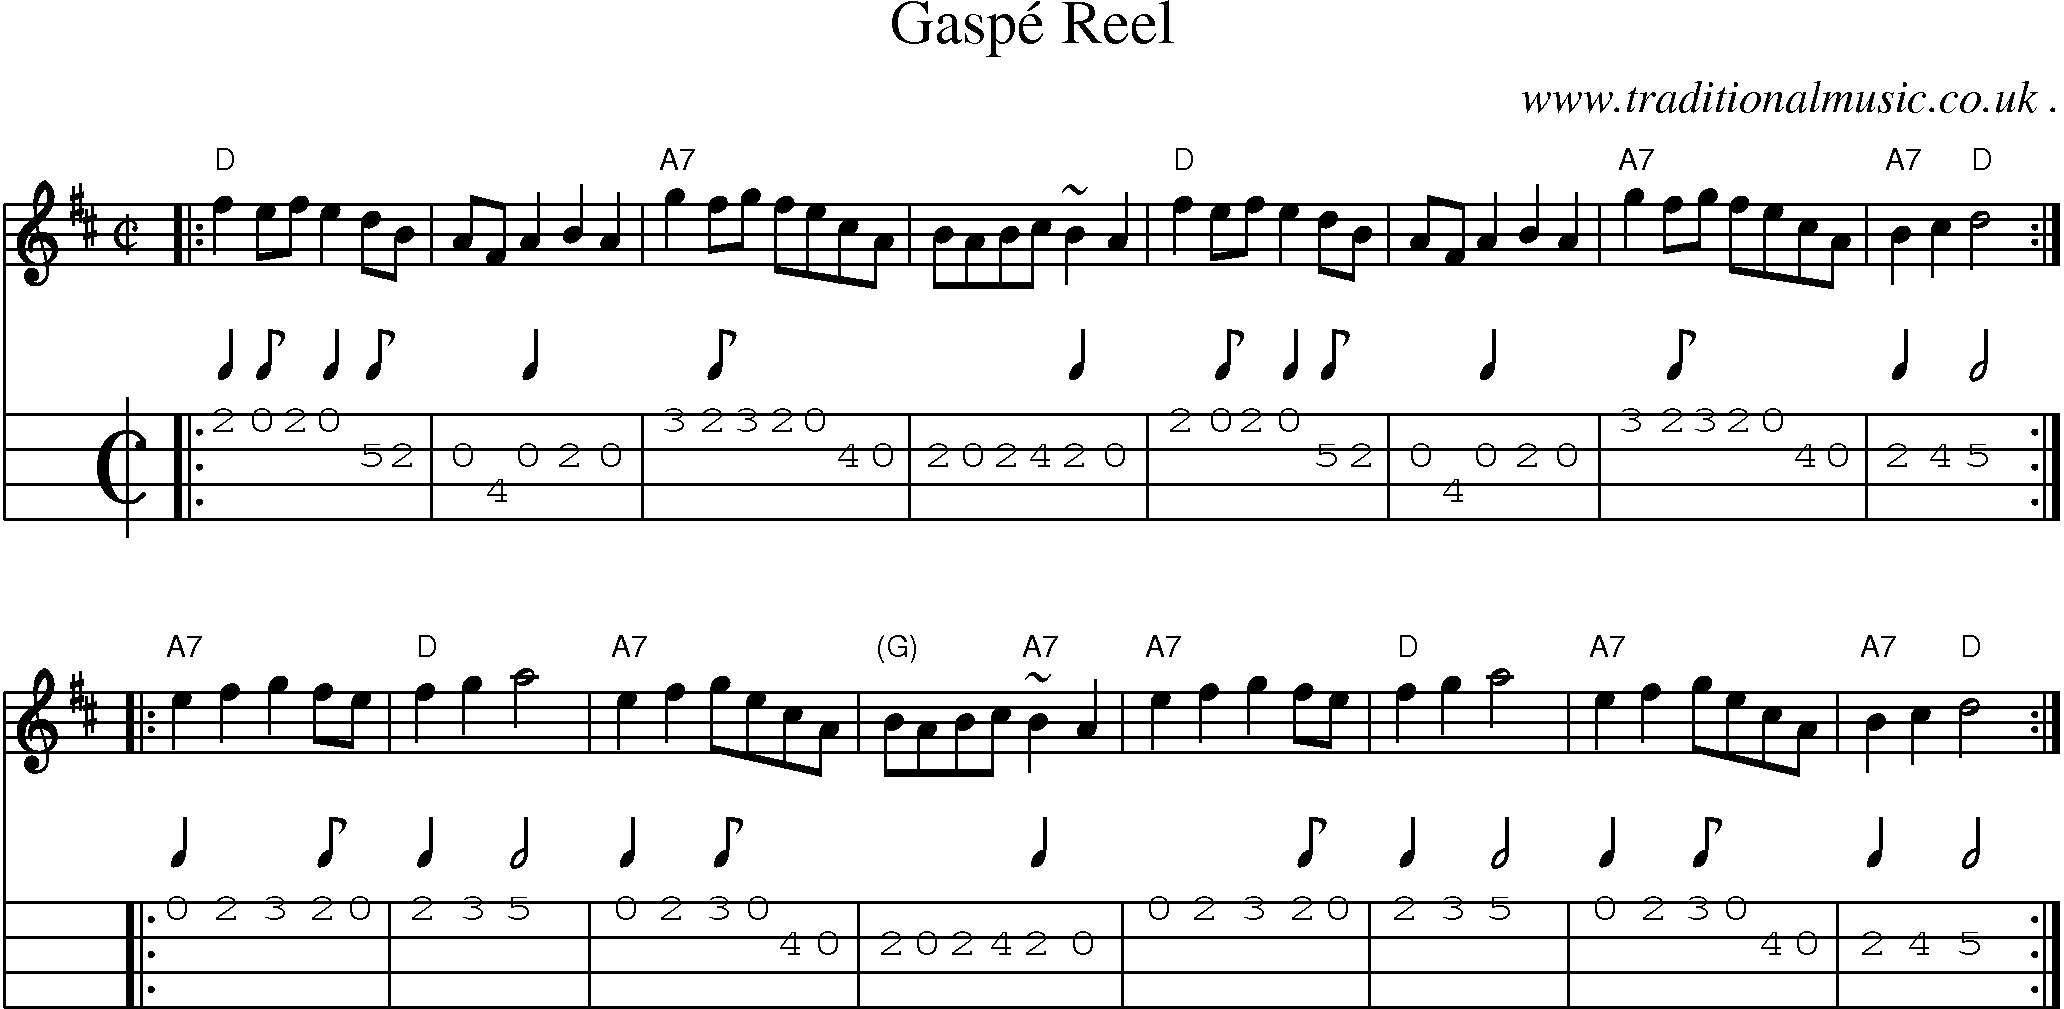 Sheet-music  score, Chords and Mandolin Tabs for Gaspe Reel